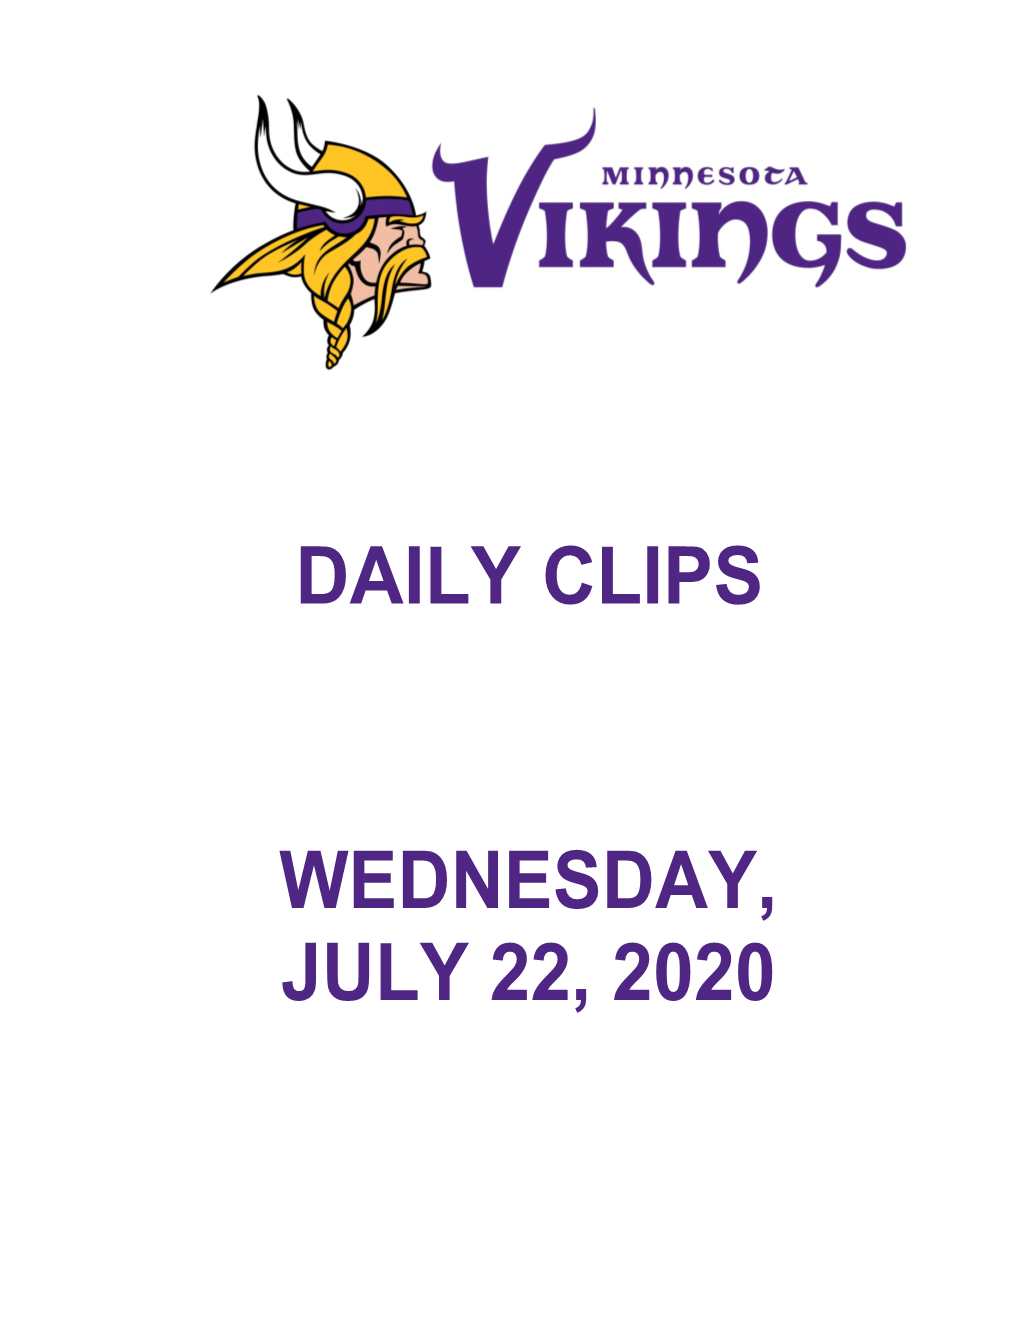 Daily Clips Wednesday, July 22, 2020